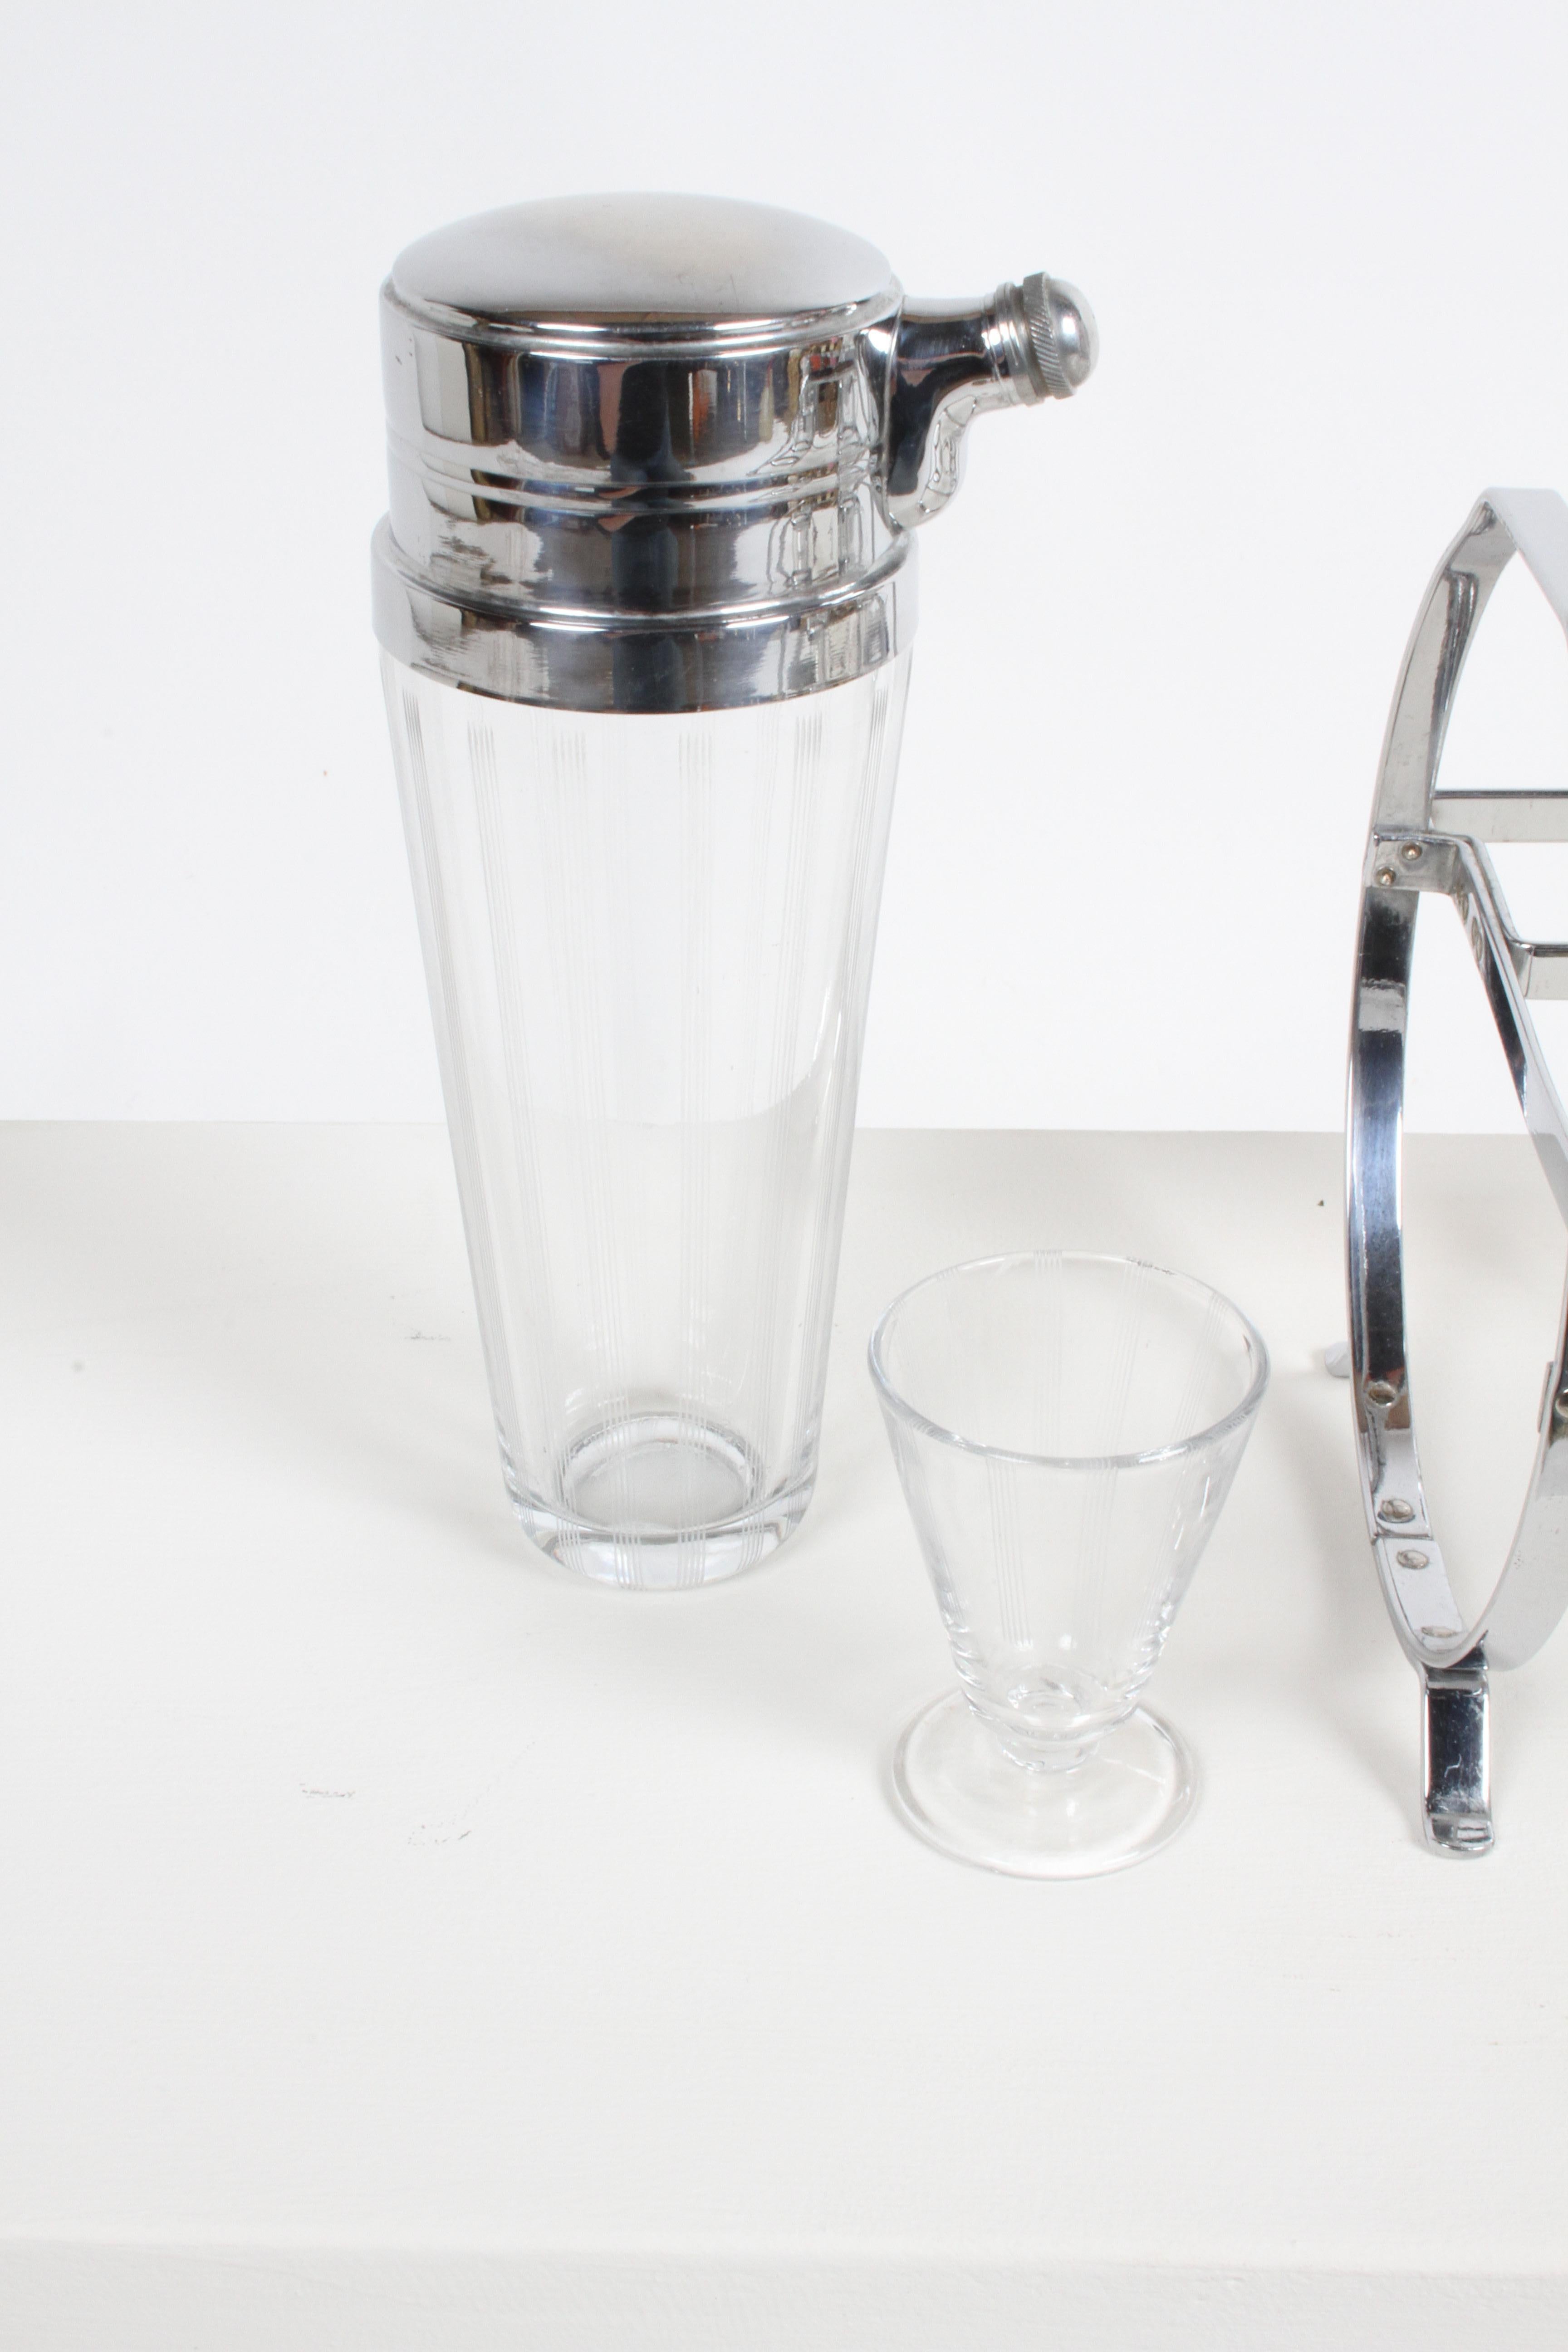 1930s Art Deco Chrome Cocktail Shaker with Six Glasses on Gyroscopic Caddy Stand For Sale 9